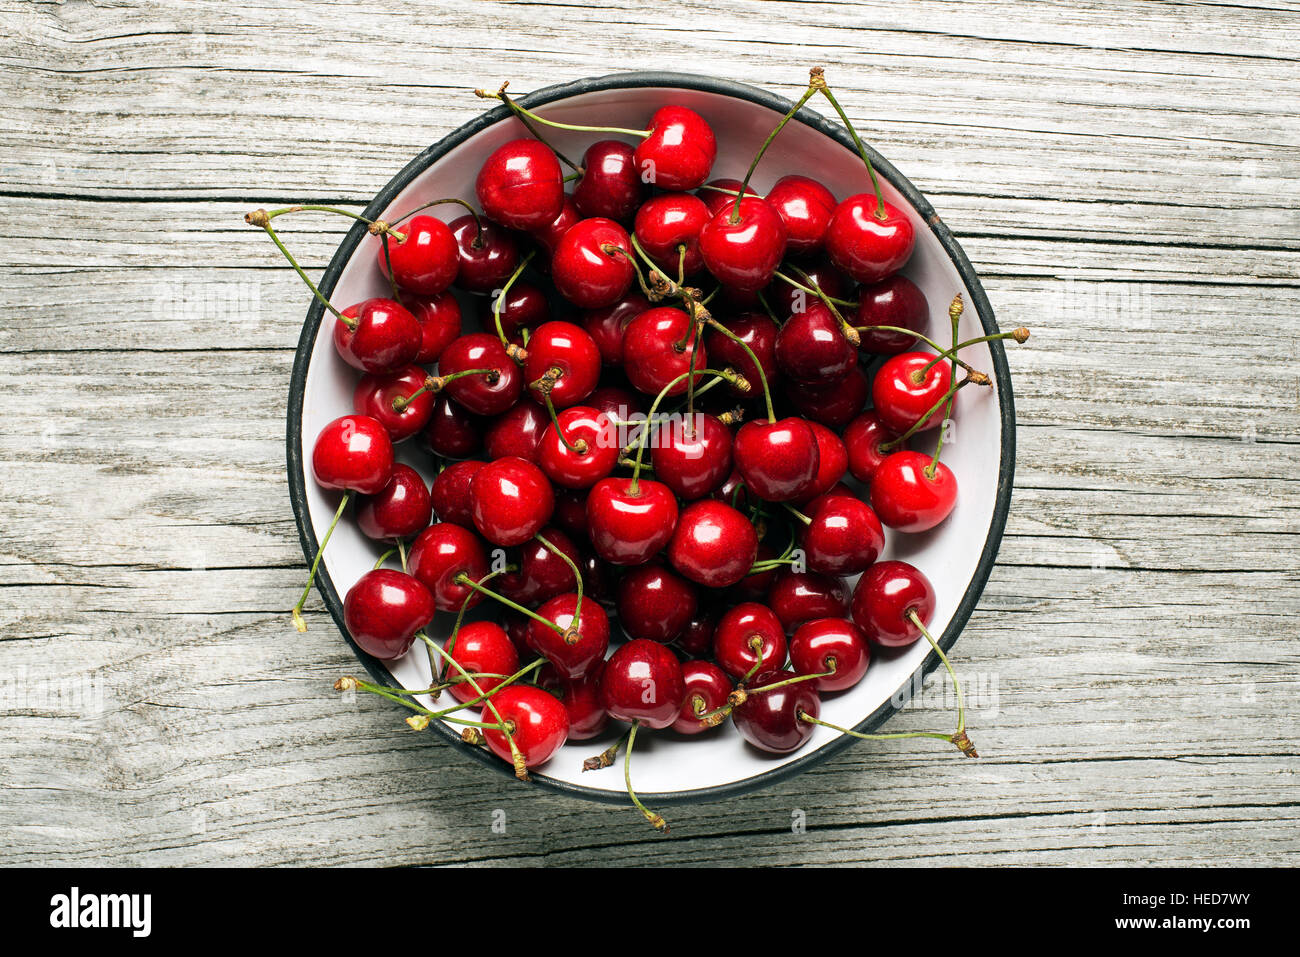 Fresh cherries in a bowl on wooden background. Stock Photo